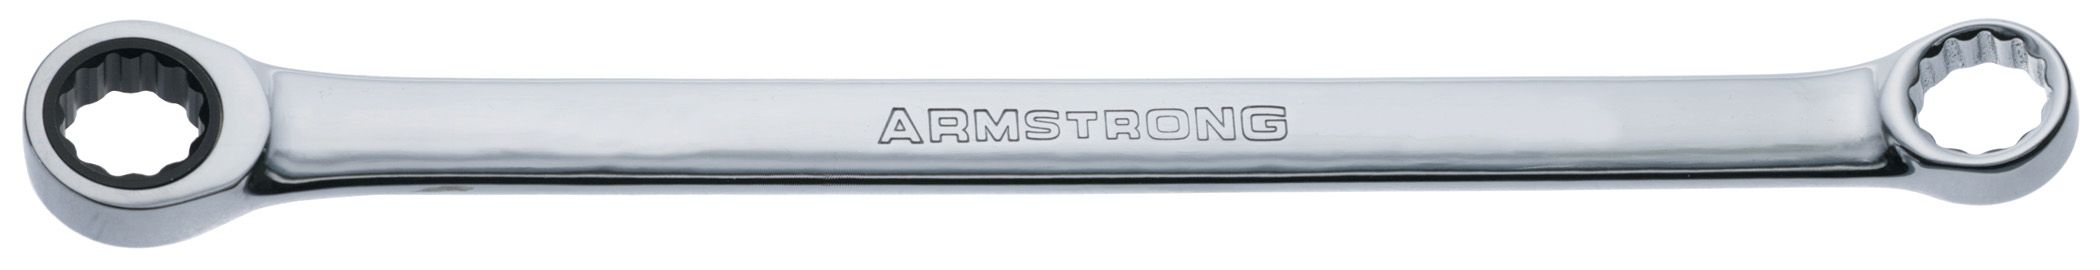 Armstrong 3/4 in. Box Ratcheting Wrench